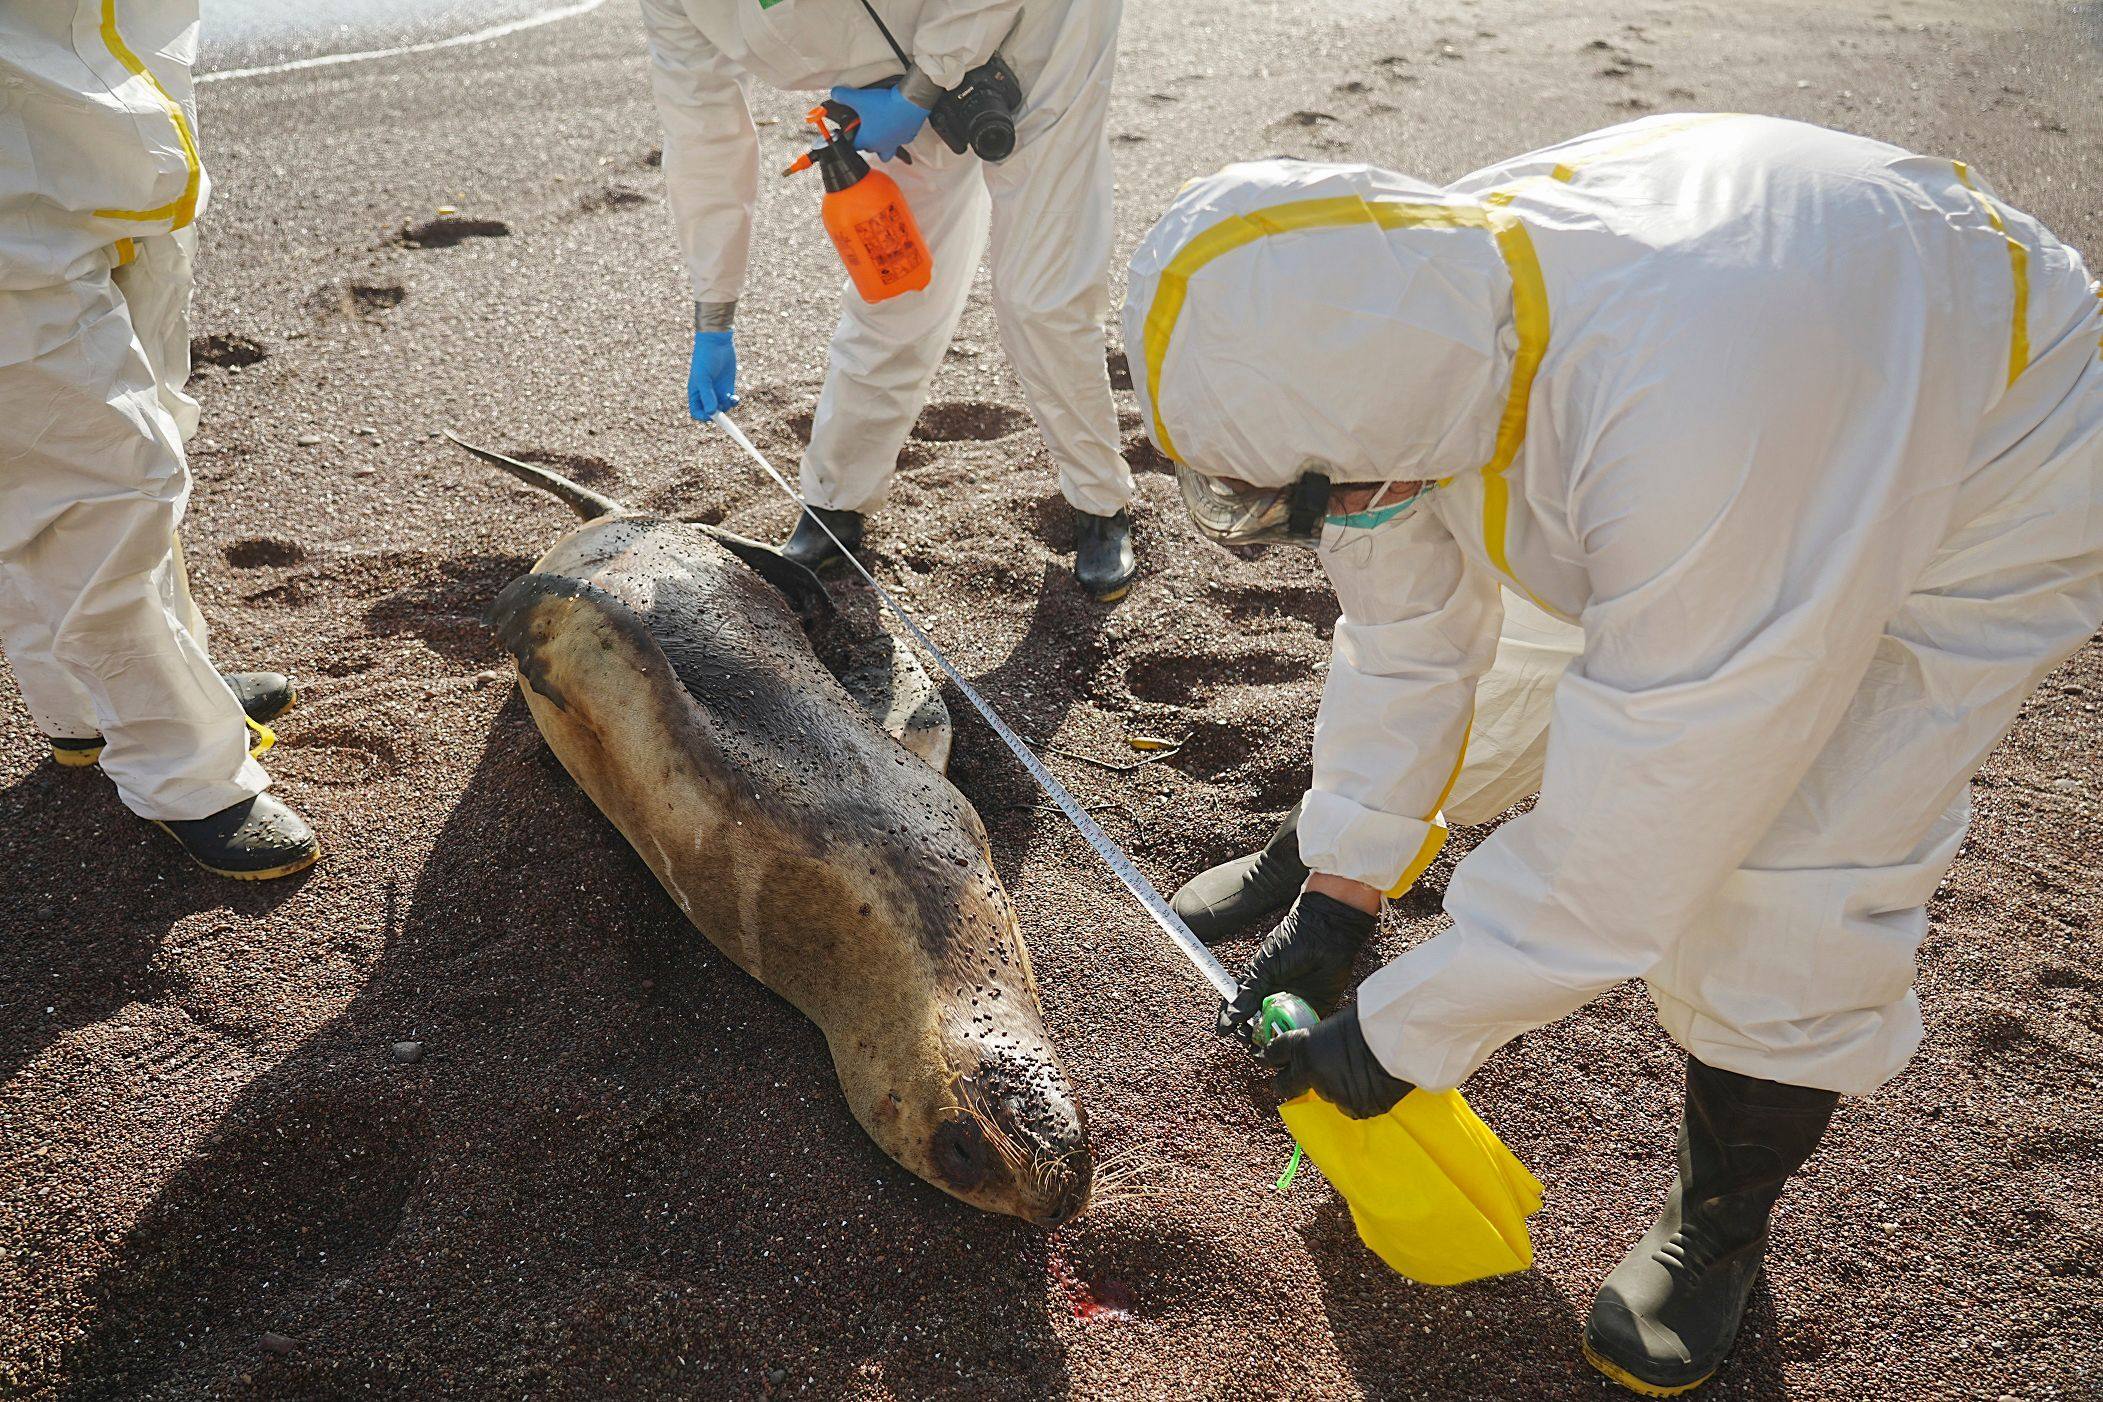 Scientists at the Paracas National Reserve inspect a dead sea lion in January while deploying a monitoring and surveillance protocol for cases of birds and sea lions affected by avian influenza in the Ica region, Peru. Photo: Peruvian National Wildlife Areas Service via AFP